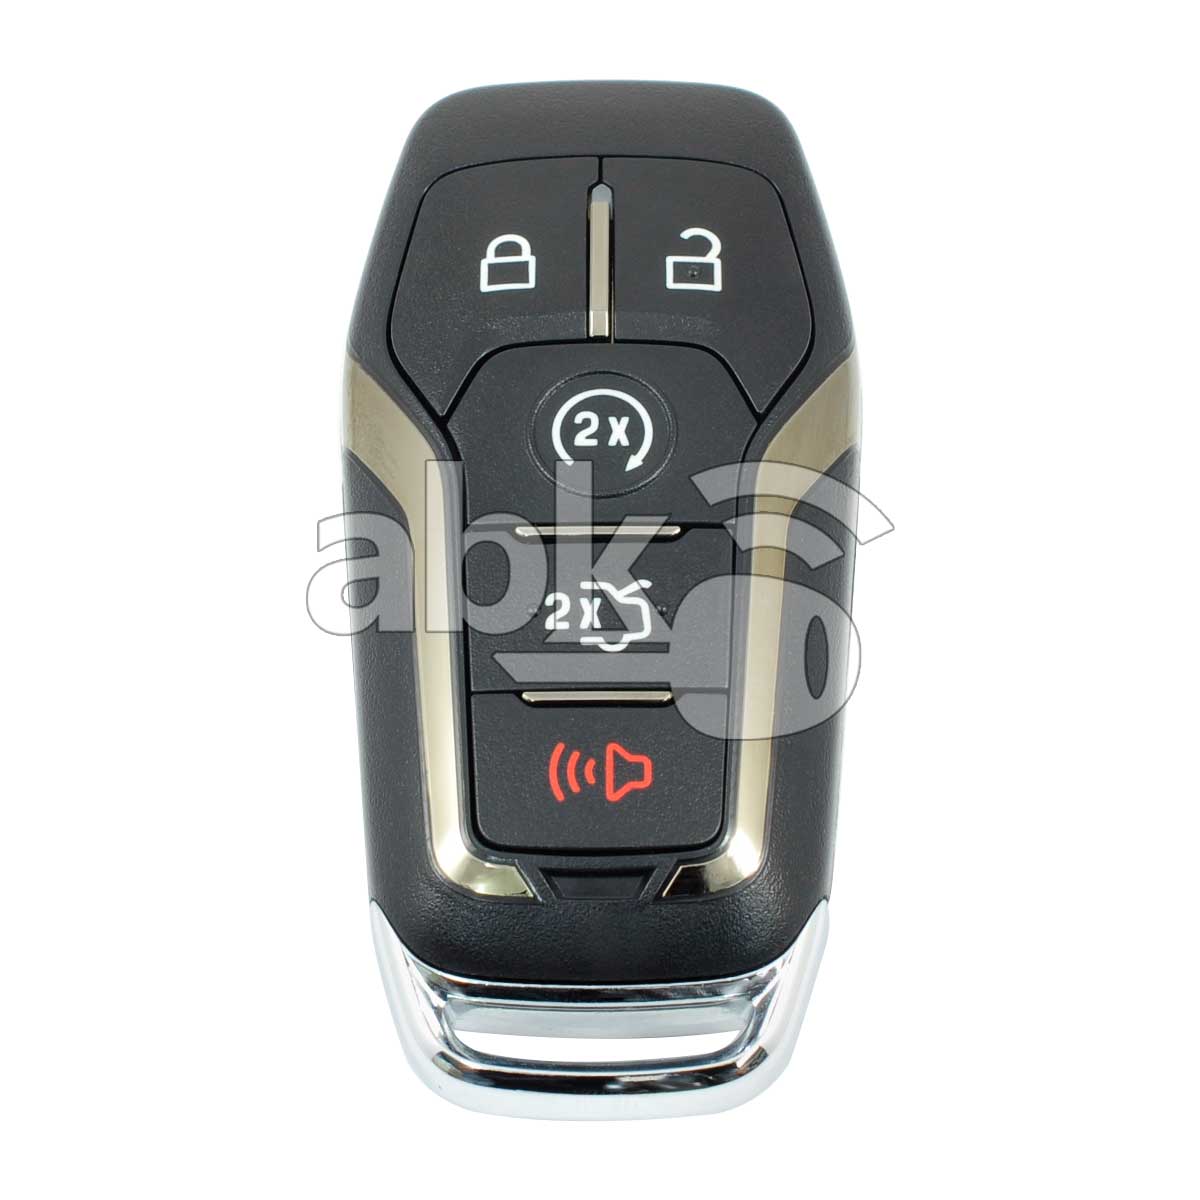 Genuine Lincoln MKC MKX 2014+ Smart Key 5Buttons 5925313 5923898 902MHz M3N-A2C31243300 - ABK-3791 -